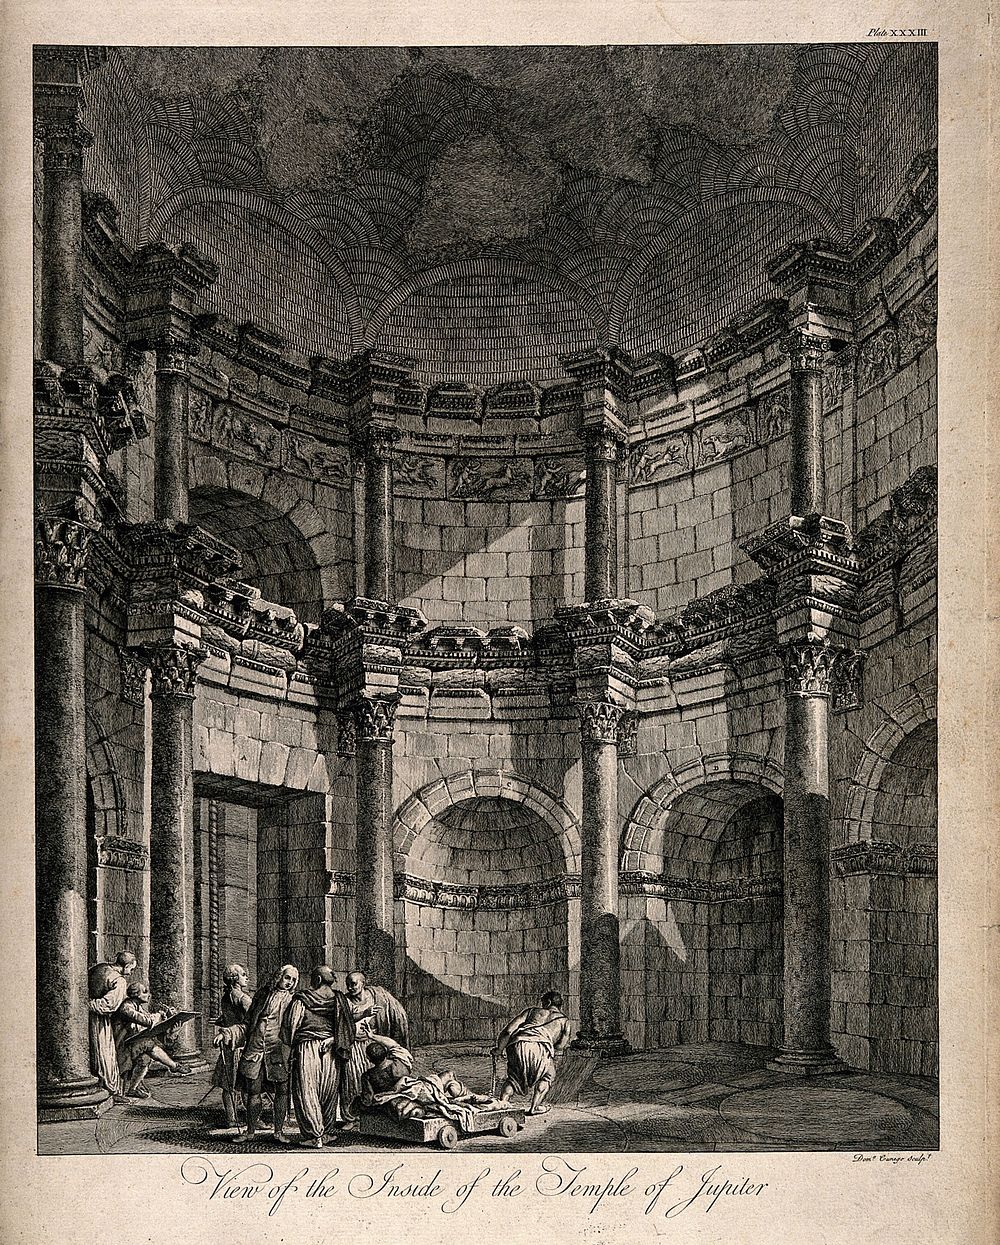 Temple of Jupiter, Spalato [Split]: interior. Engraving by D. Cunego.